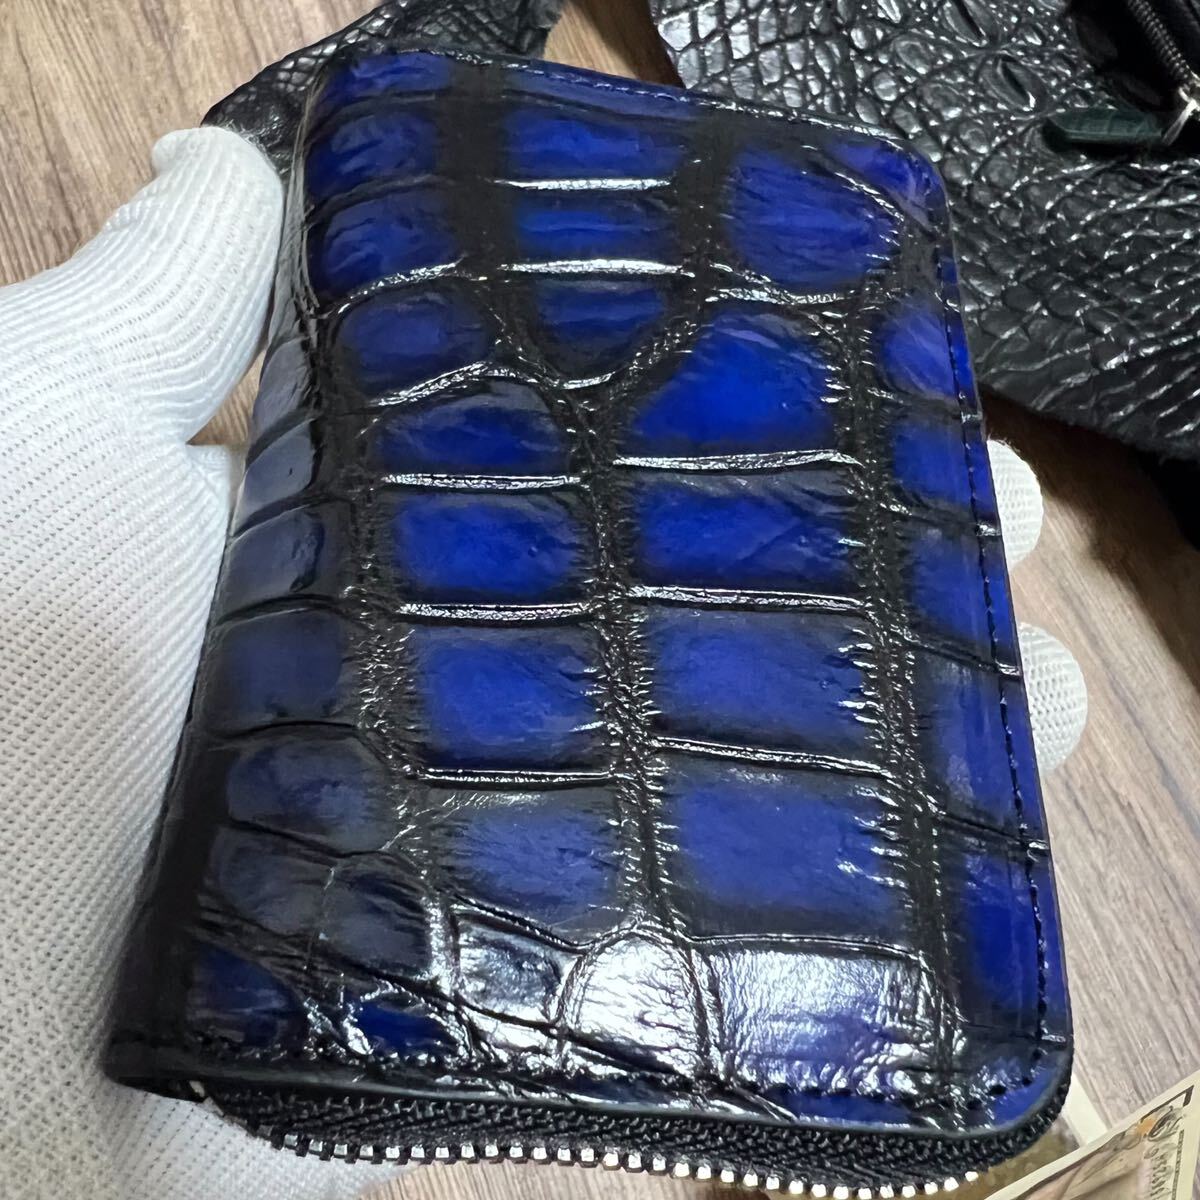  rare [ the truth thing photographing ] elegant blue crocodile men's round fastener wani. original leather hand dyeing handmade long wallet .. compact Mini purse 